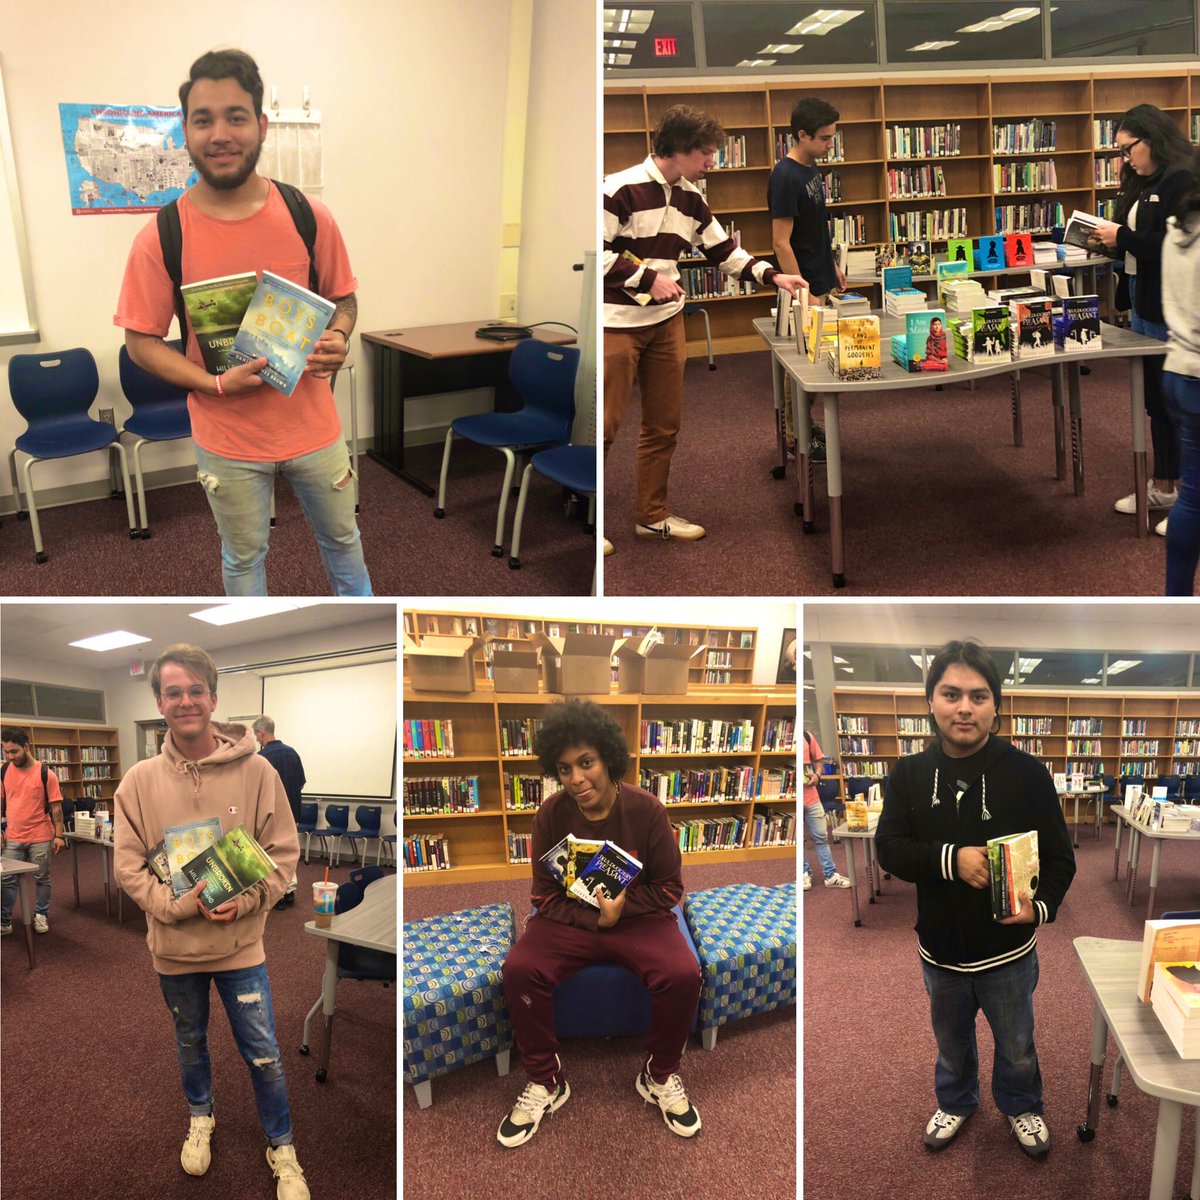 The South Lakes Credit Recovery Academy had a FREE Book Fair where students received up to 3 books each! It was incredible! #GotBooks #KeepKidsReading #LIT #FreeBooksForKids @FCPS_Summer @OlmesAP @KellyCosgrove10 @SLakesLibrary @Maitland_Mann